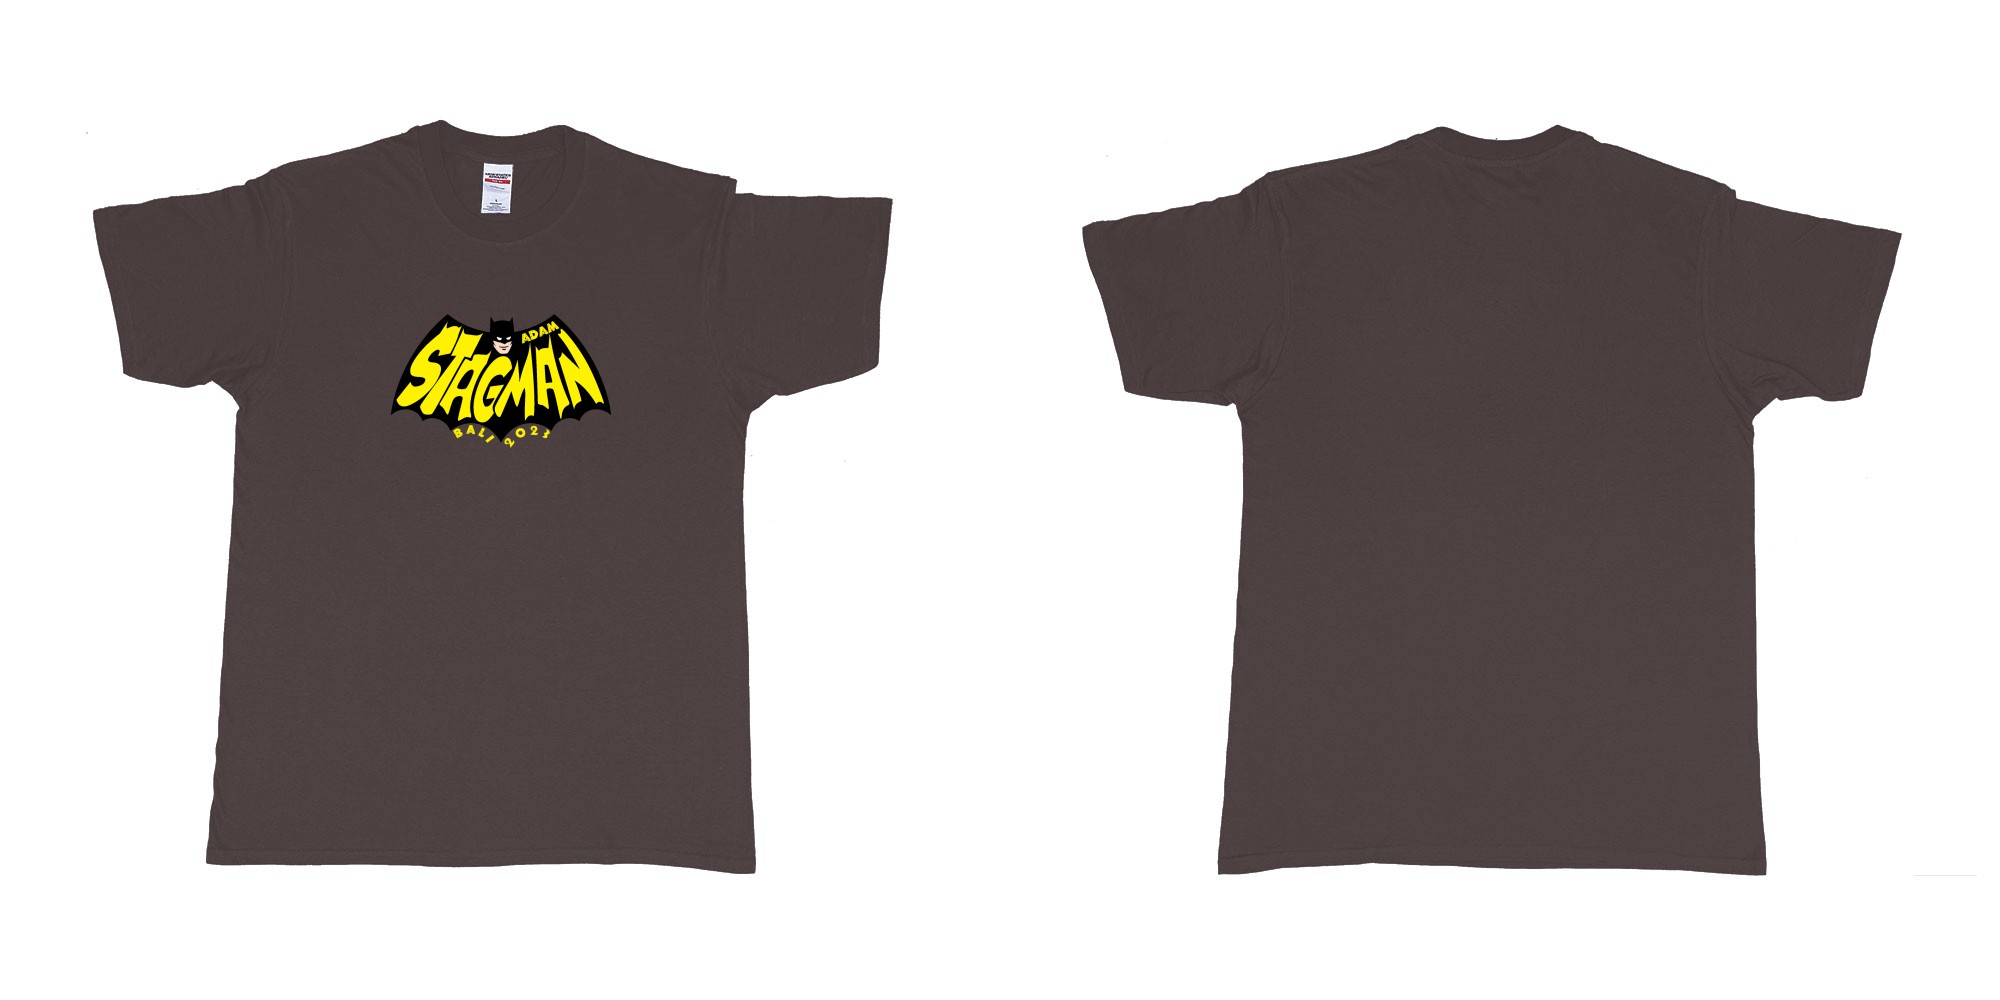 Custom tshirt design Batman StagMan Old School in fabric color dark-chocolate choice your own text made in Bali by The Pirate Way